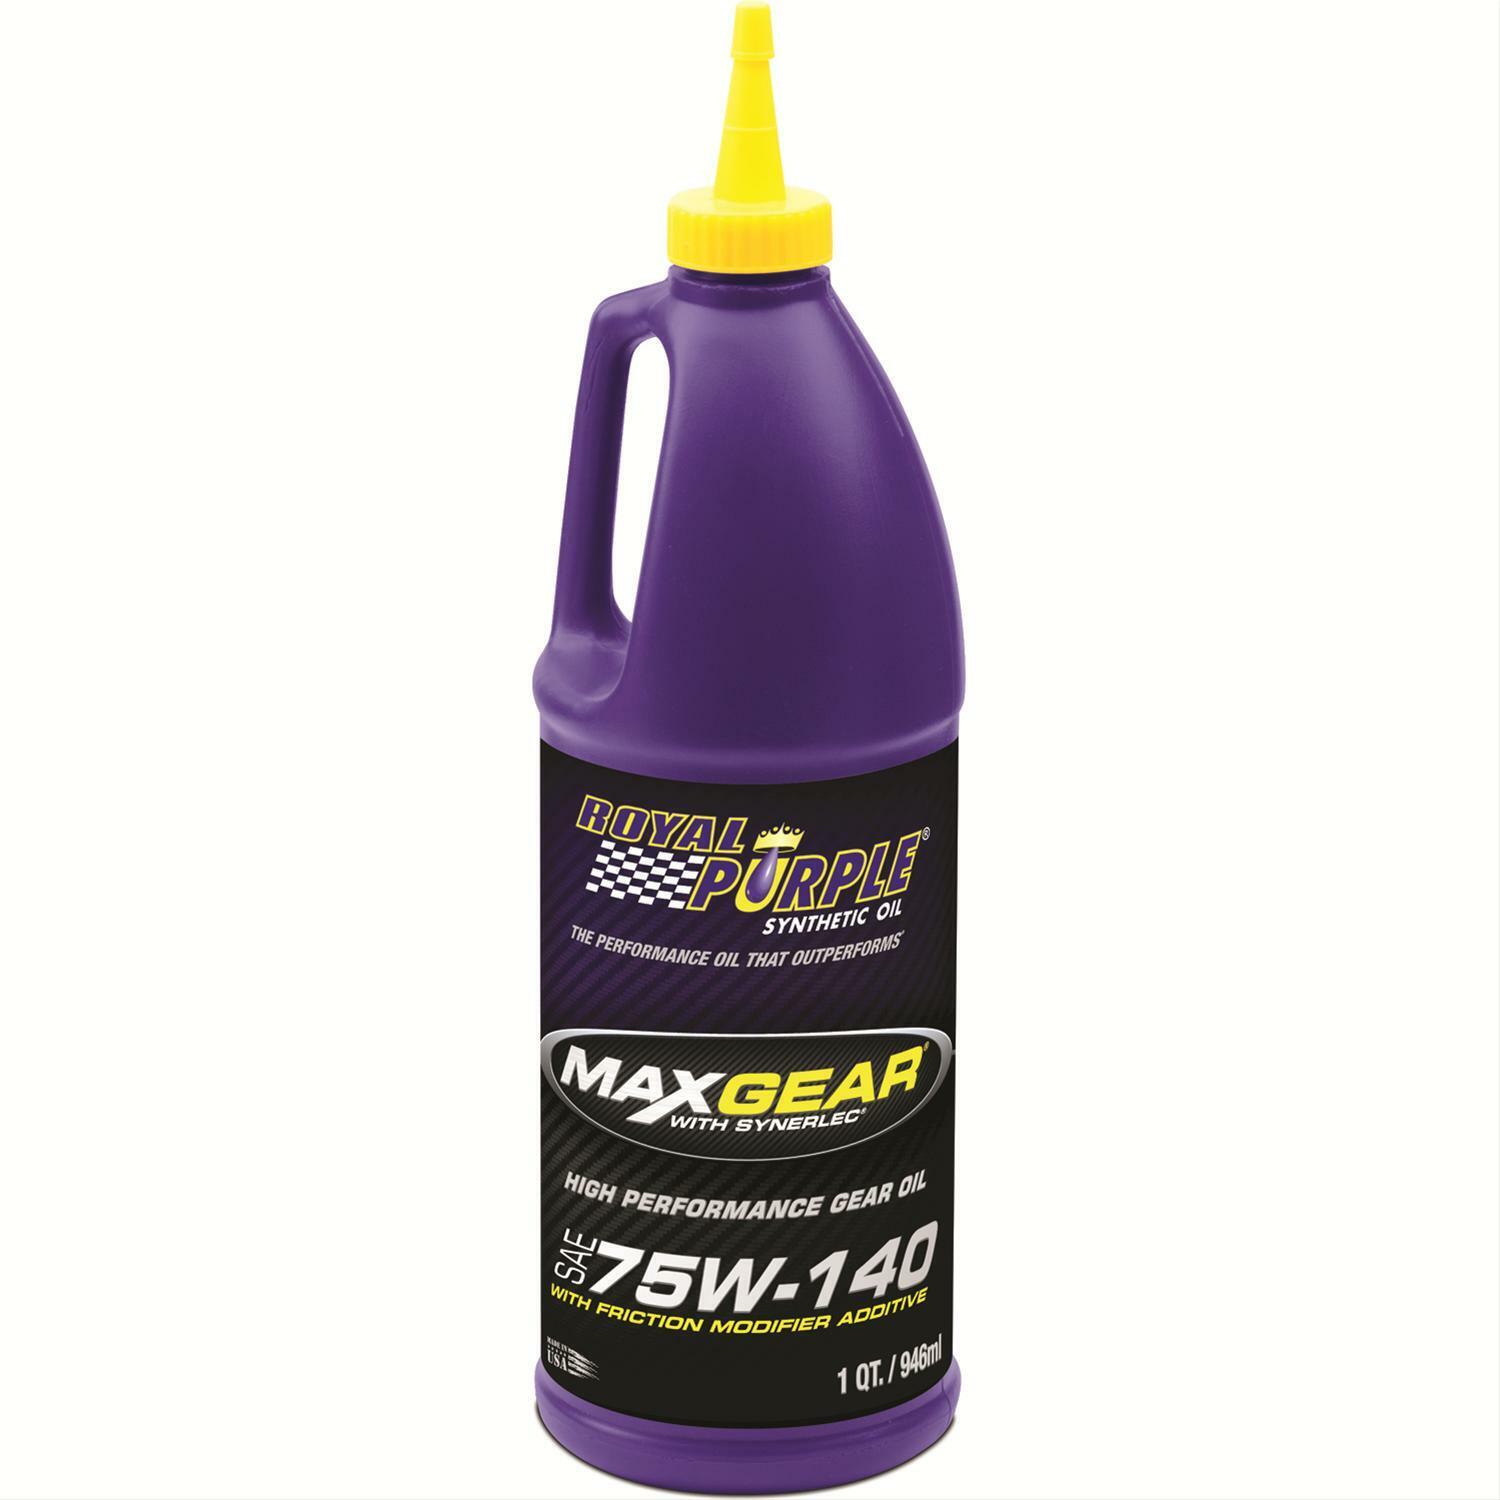 Royal Purple Max-Gear 75W140 Oil Synthetic Differential Gear Oil 01301 1 Quart